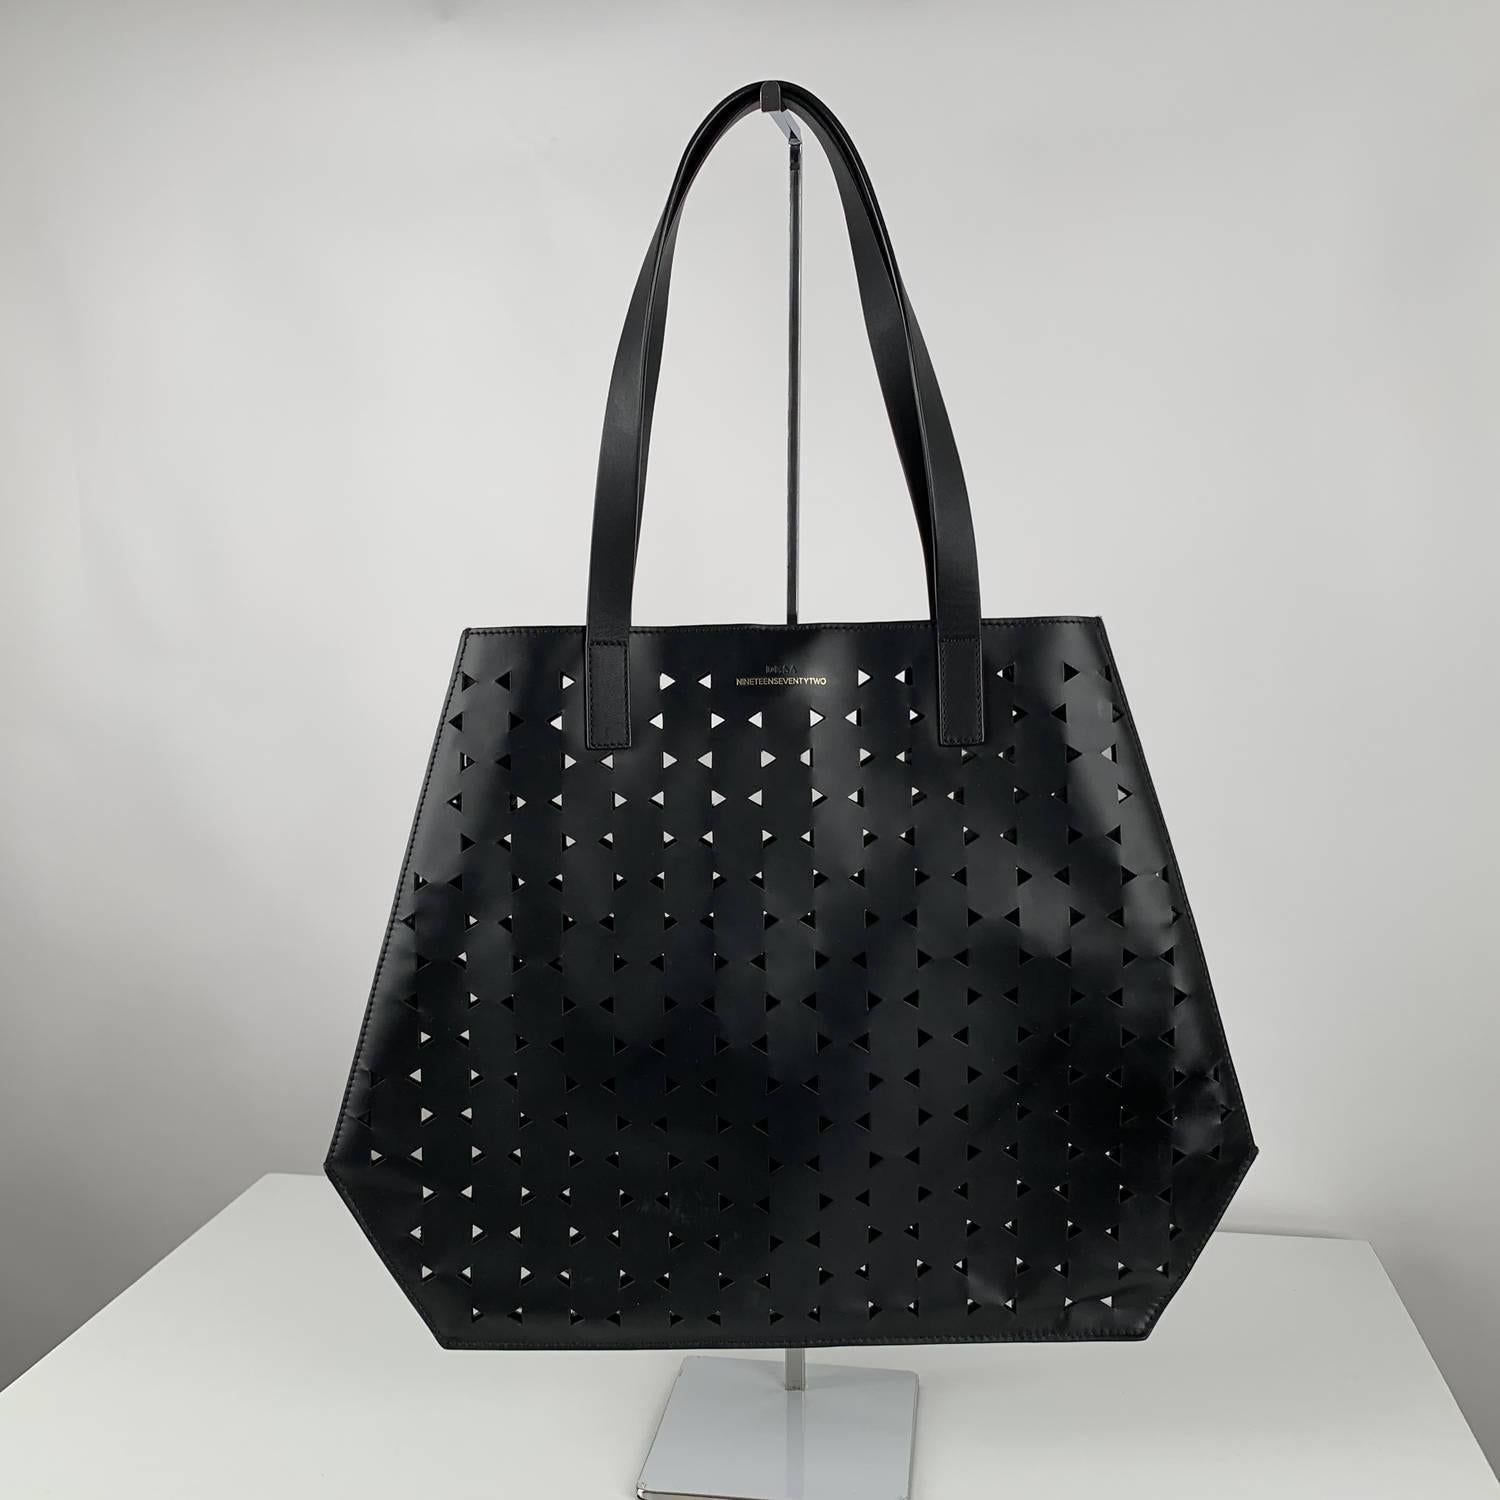 MATERIAL: Vinyl COLOR: Black MODEL: Tote GENDER: Women SIZE: Medium Condition CONDITION DETAILS: B :GOOD CONDITION - Some light wear of use - Minimal scratches due to normal use Measurements MEASUREMENTS: BAG HEIGHT: 13.75 inches - 35 cm BAG LENGTH: